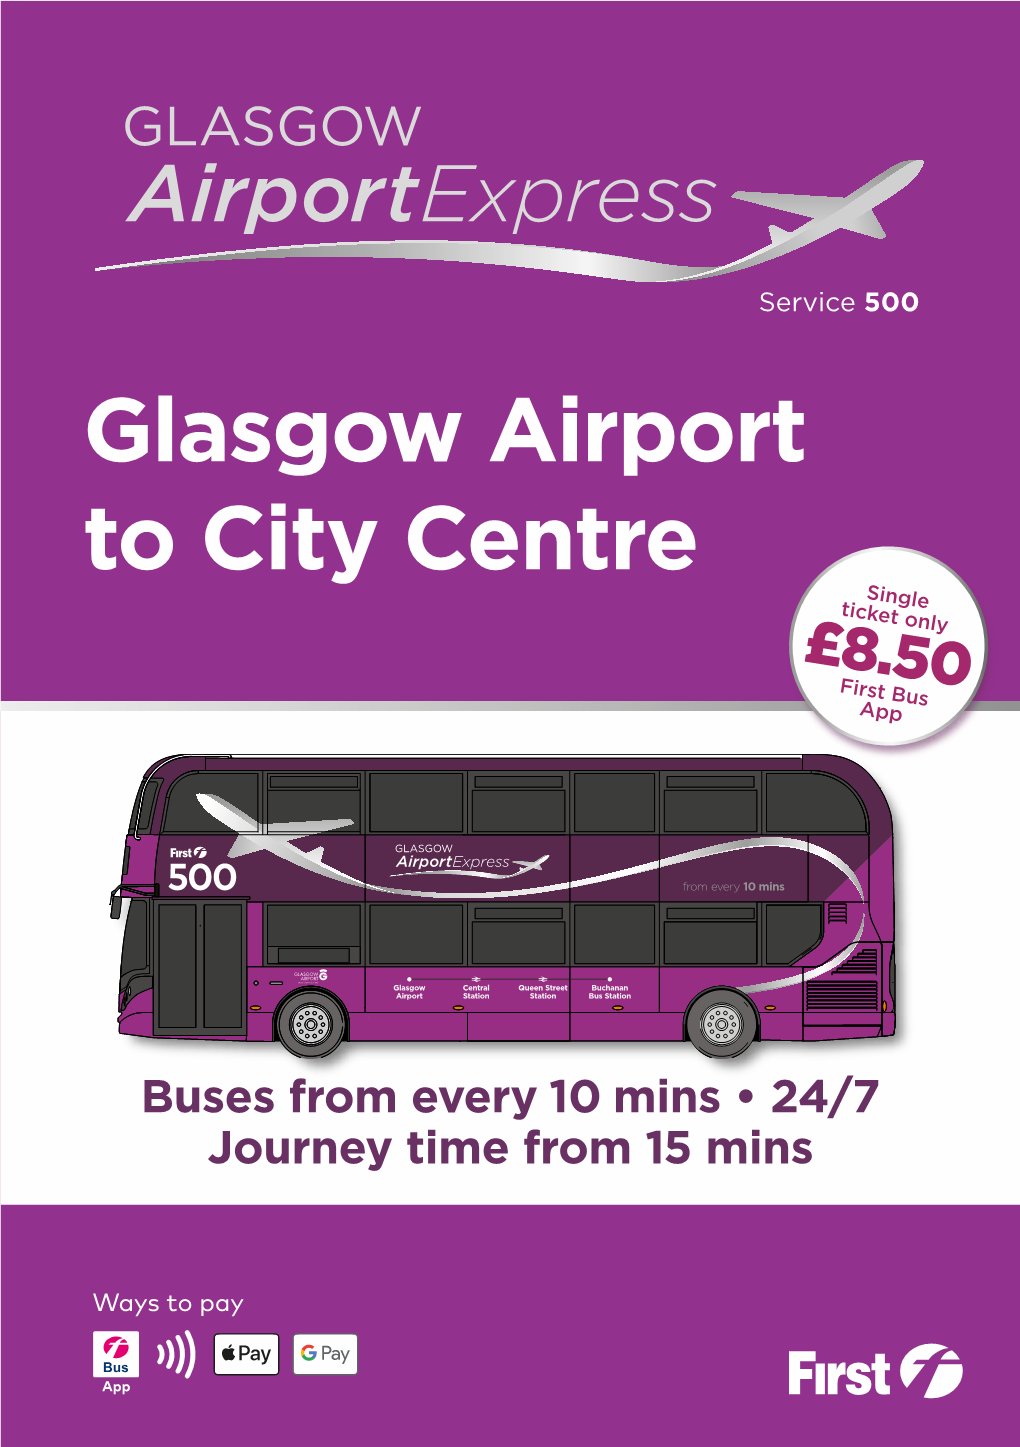 Glasgow Airport to City Centre Single Ticket Only £8.50 First Bus App